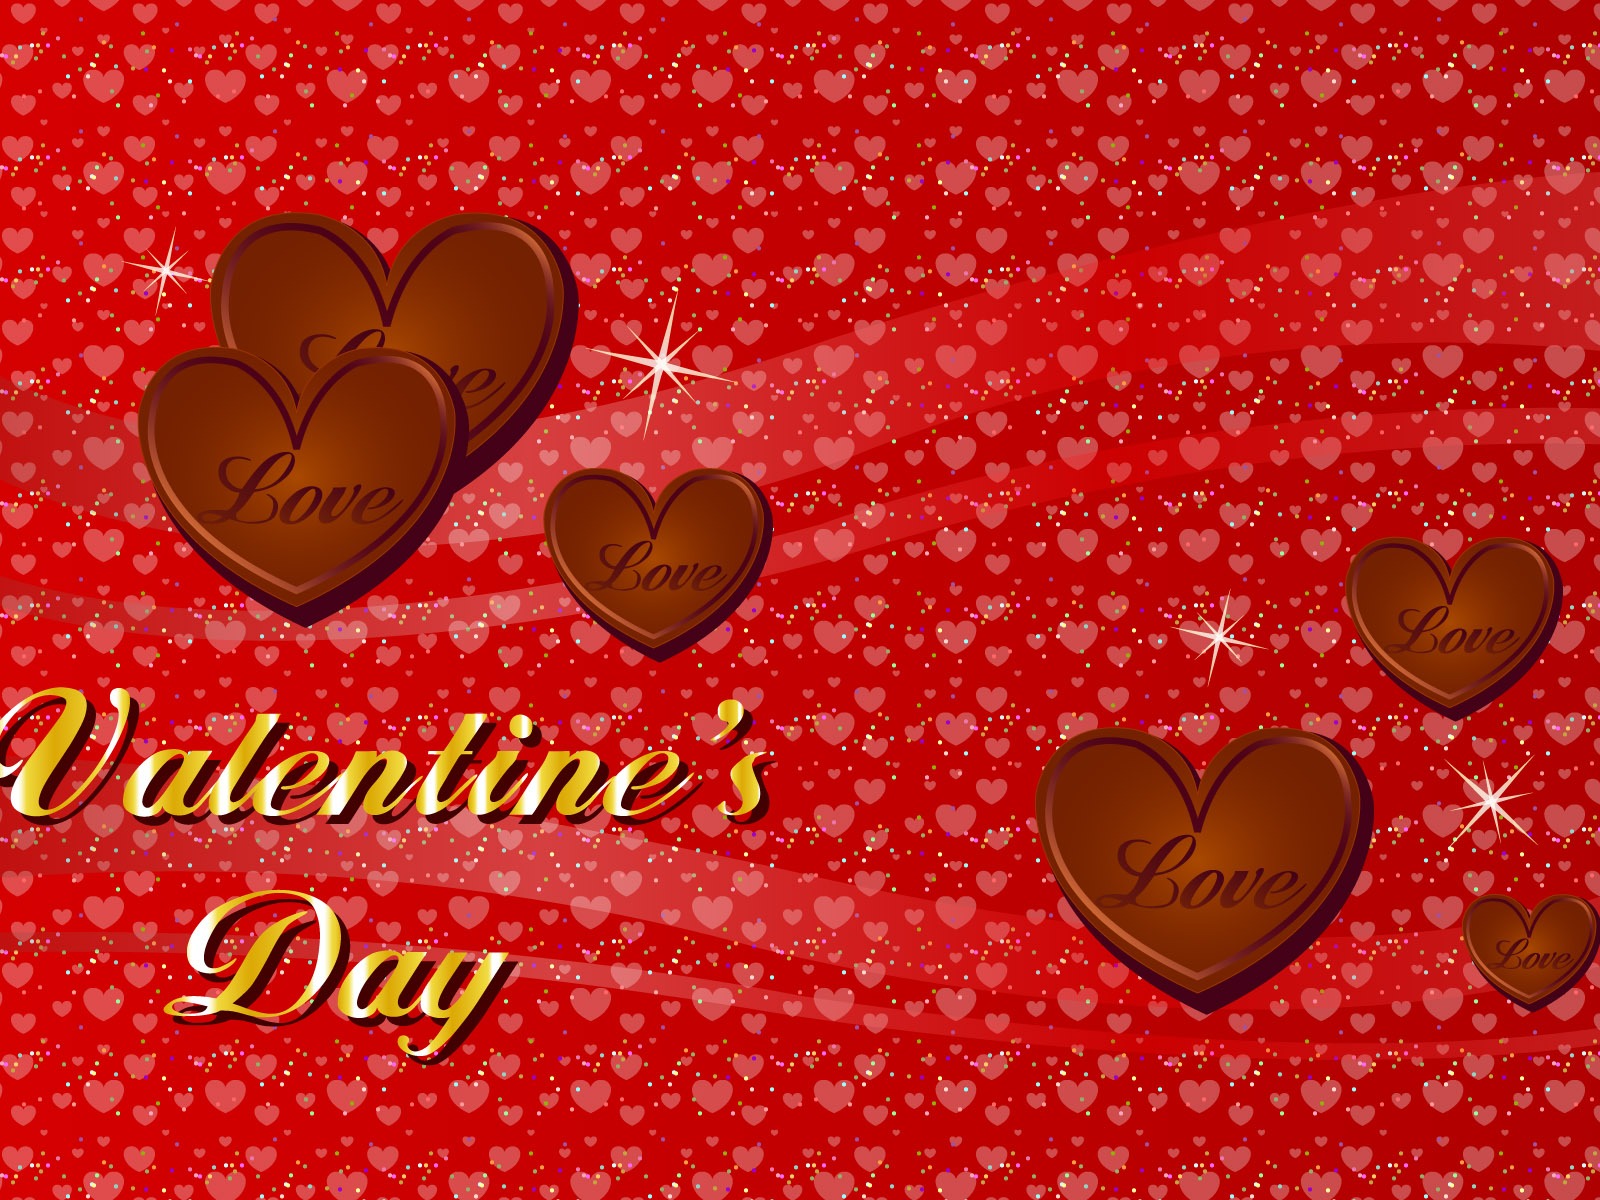 Valentine's Day Theme Wallpapers (1) #14 - 1600x1200